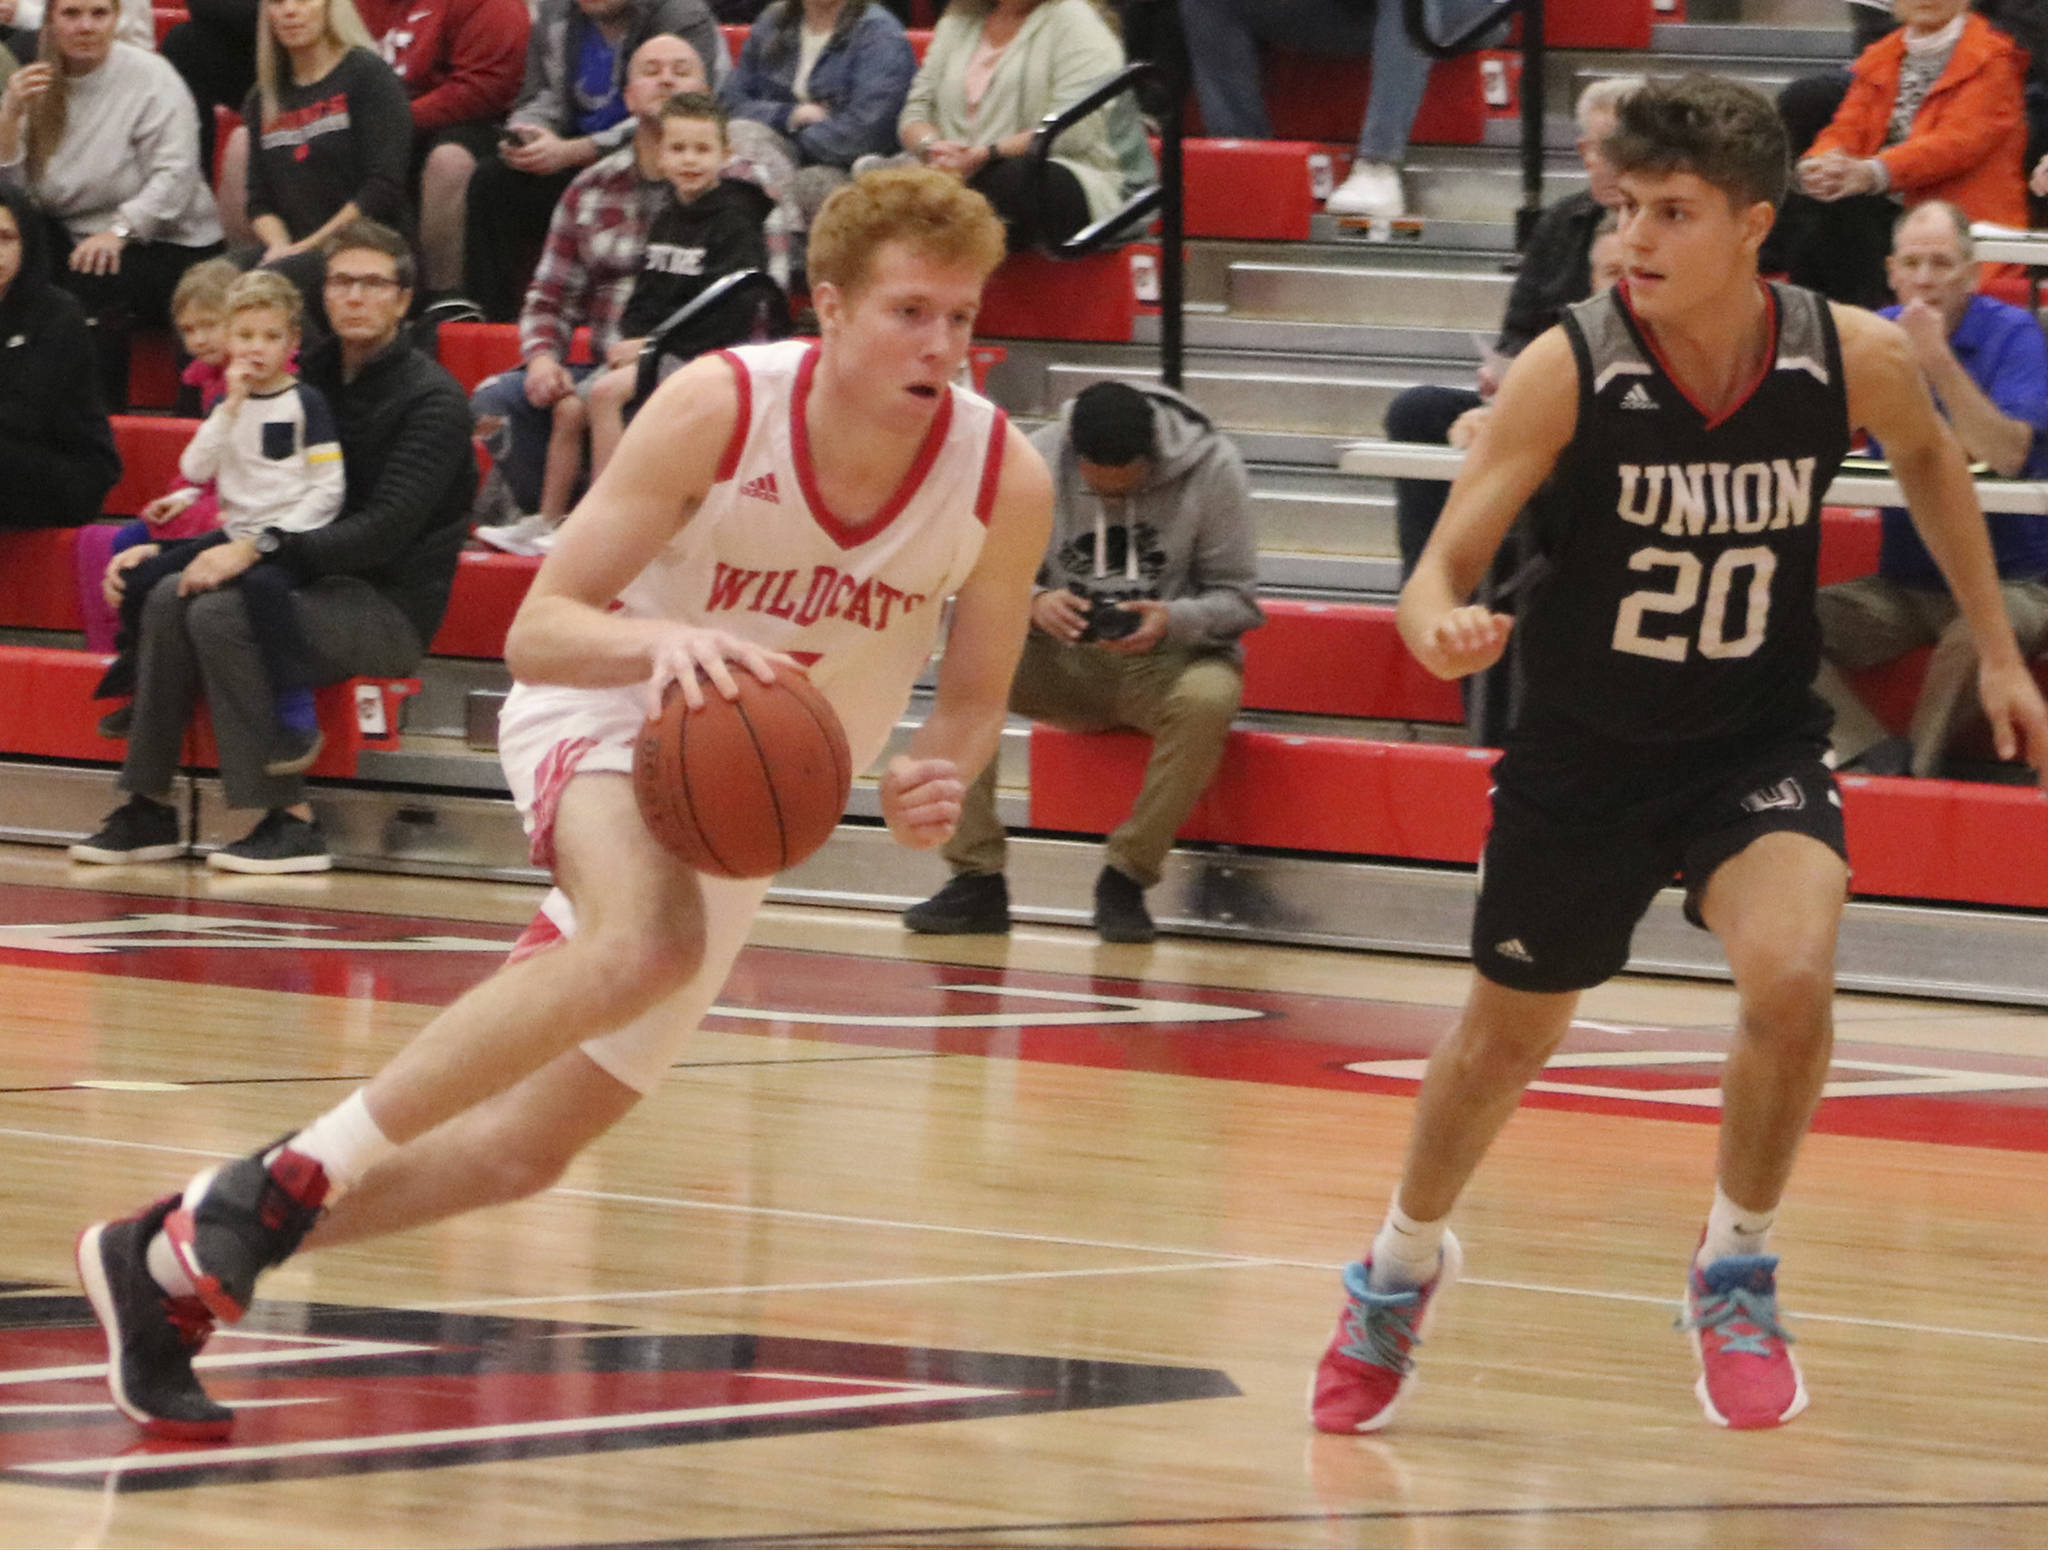 Mount Si senior guard Jabe Mullins (left) drives to the basket during the Wildcats’ 68-51 loss to Union on Dec. 14. Mullins finished with 17 points. Benjamin Olson/staff photo